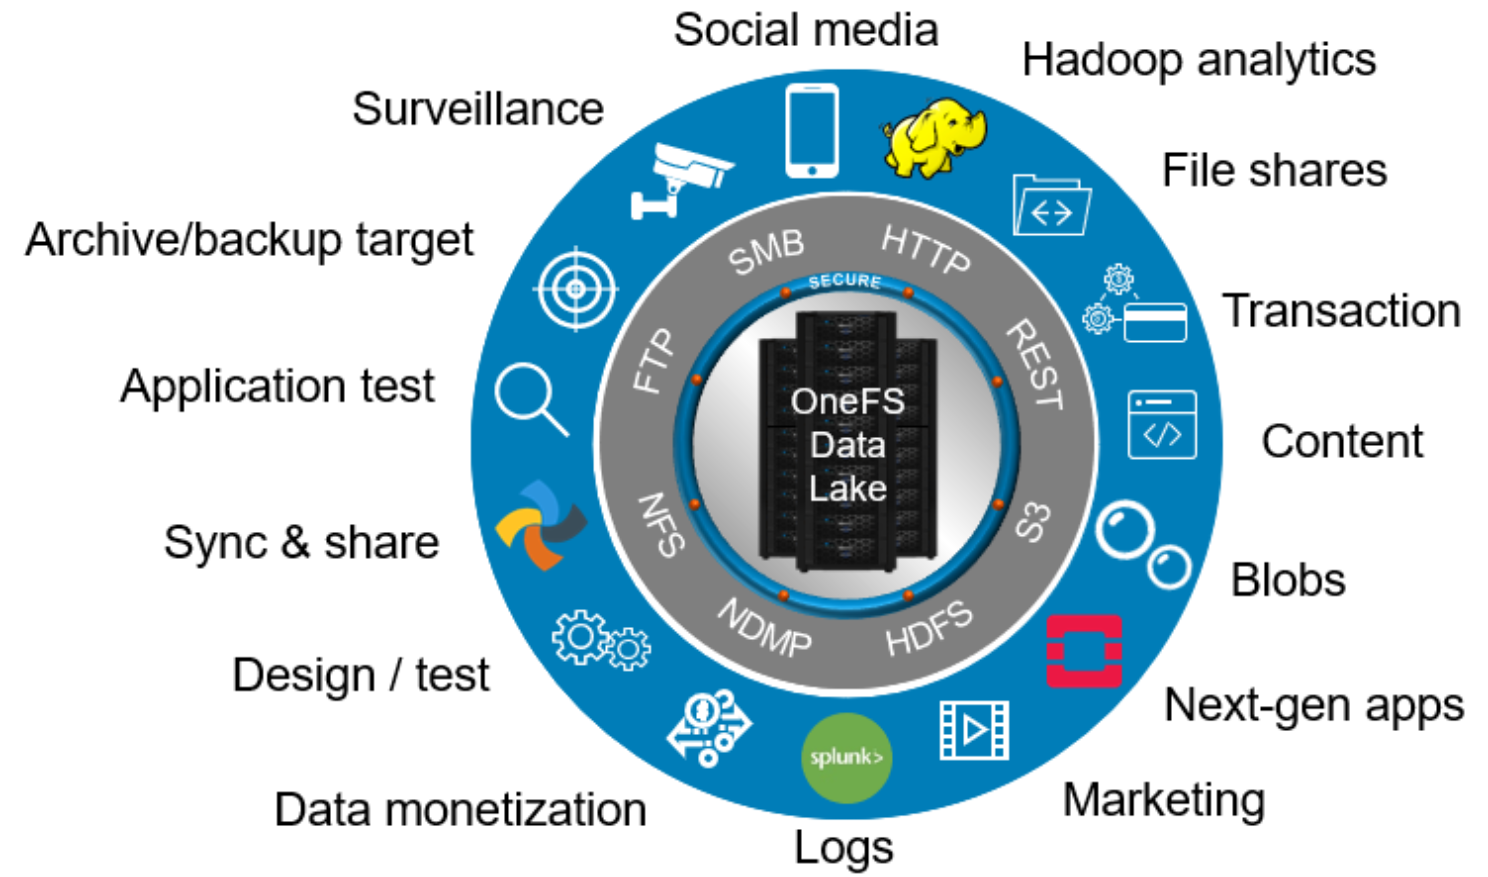 Graphic illustrating the OneFS data lake, with concentric rings for multi-protocol support and a wide range of traditional and next-gen applications and workloads.